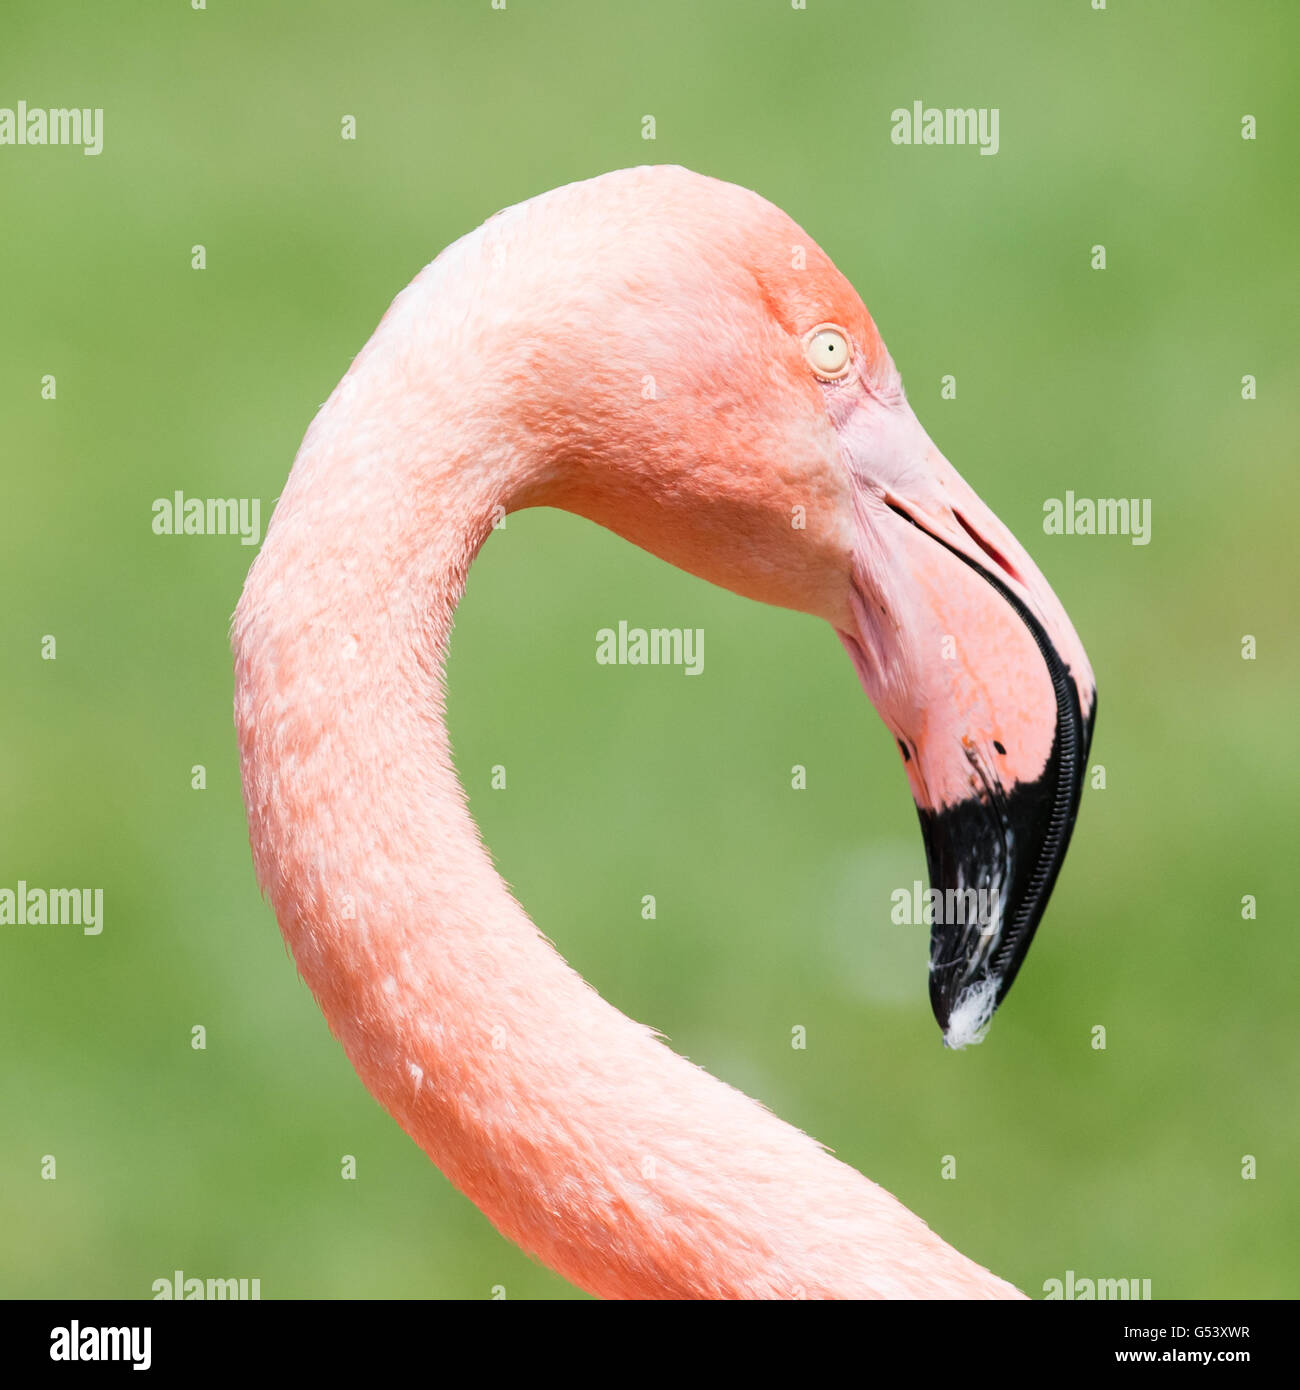 Pink flamingo close-up, isolated on green grass background Stock Photo